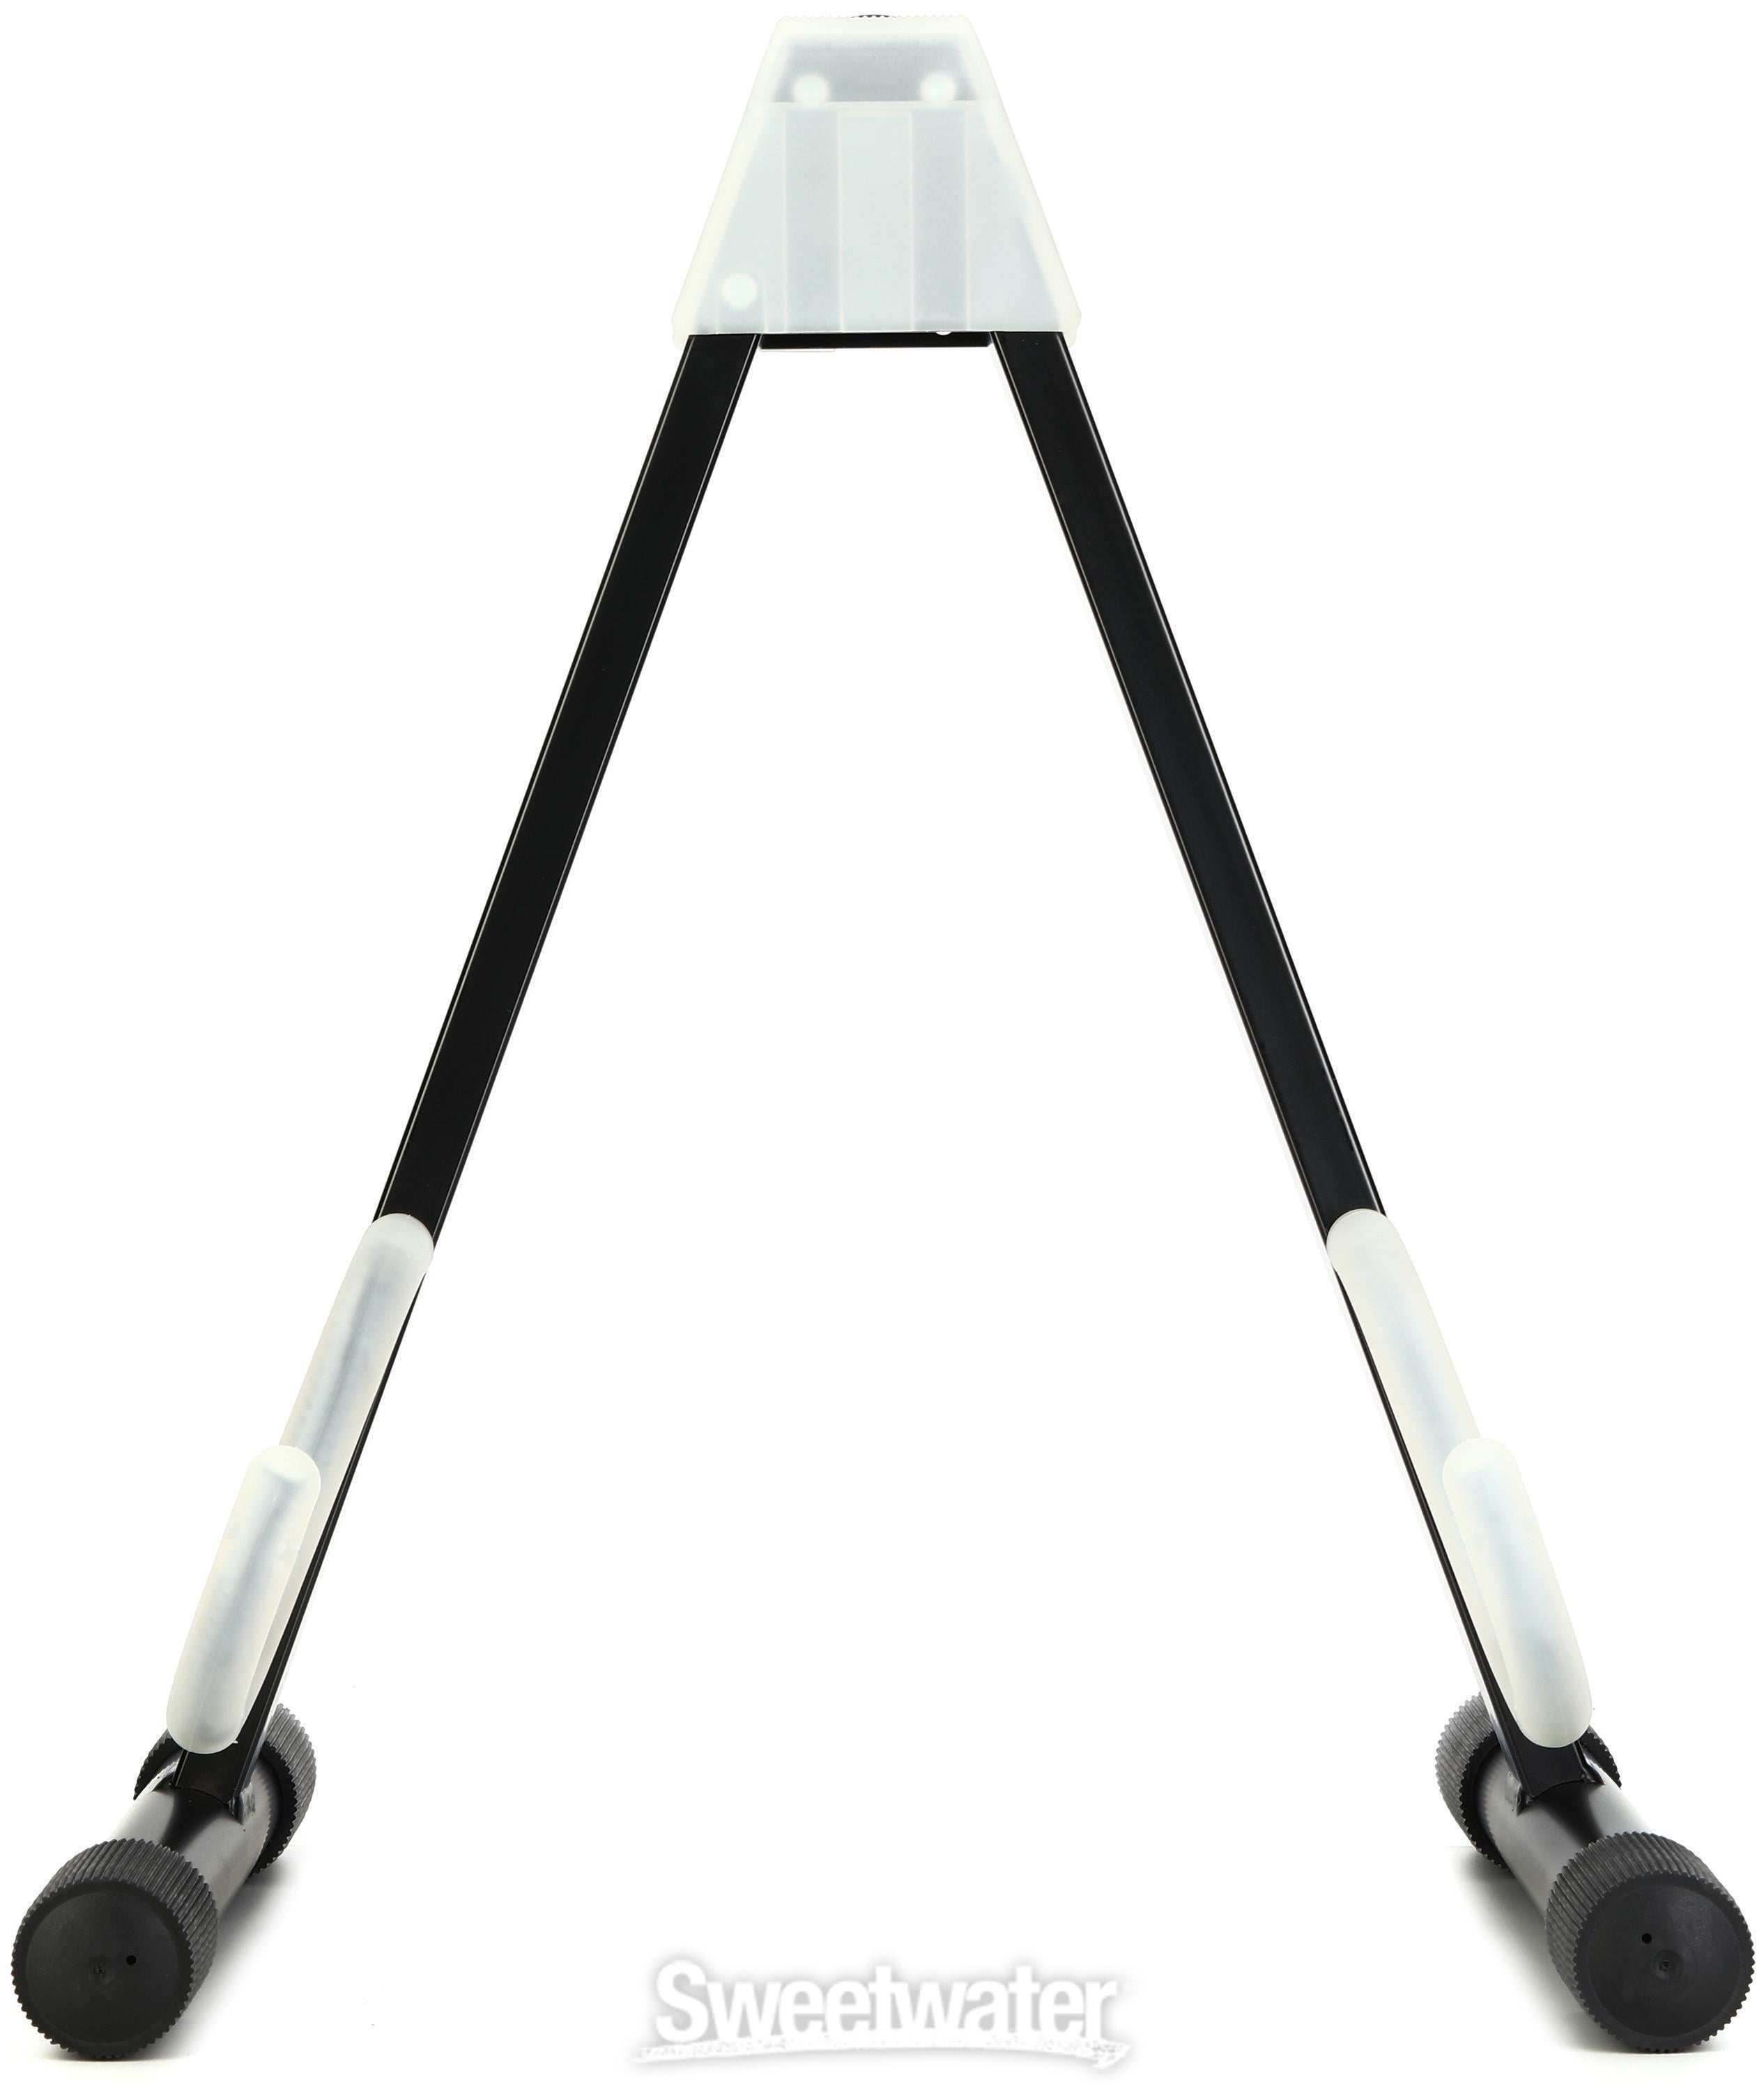 K&M 17540 E-Guitar Stand - Black and Translucent | Sweetwater